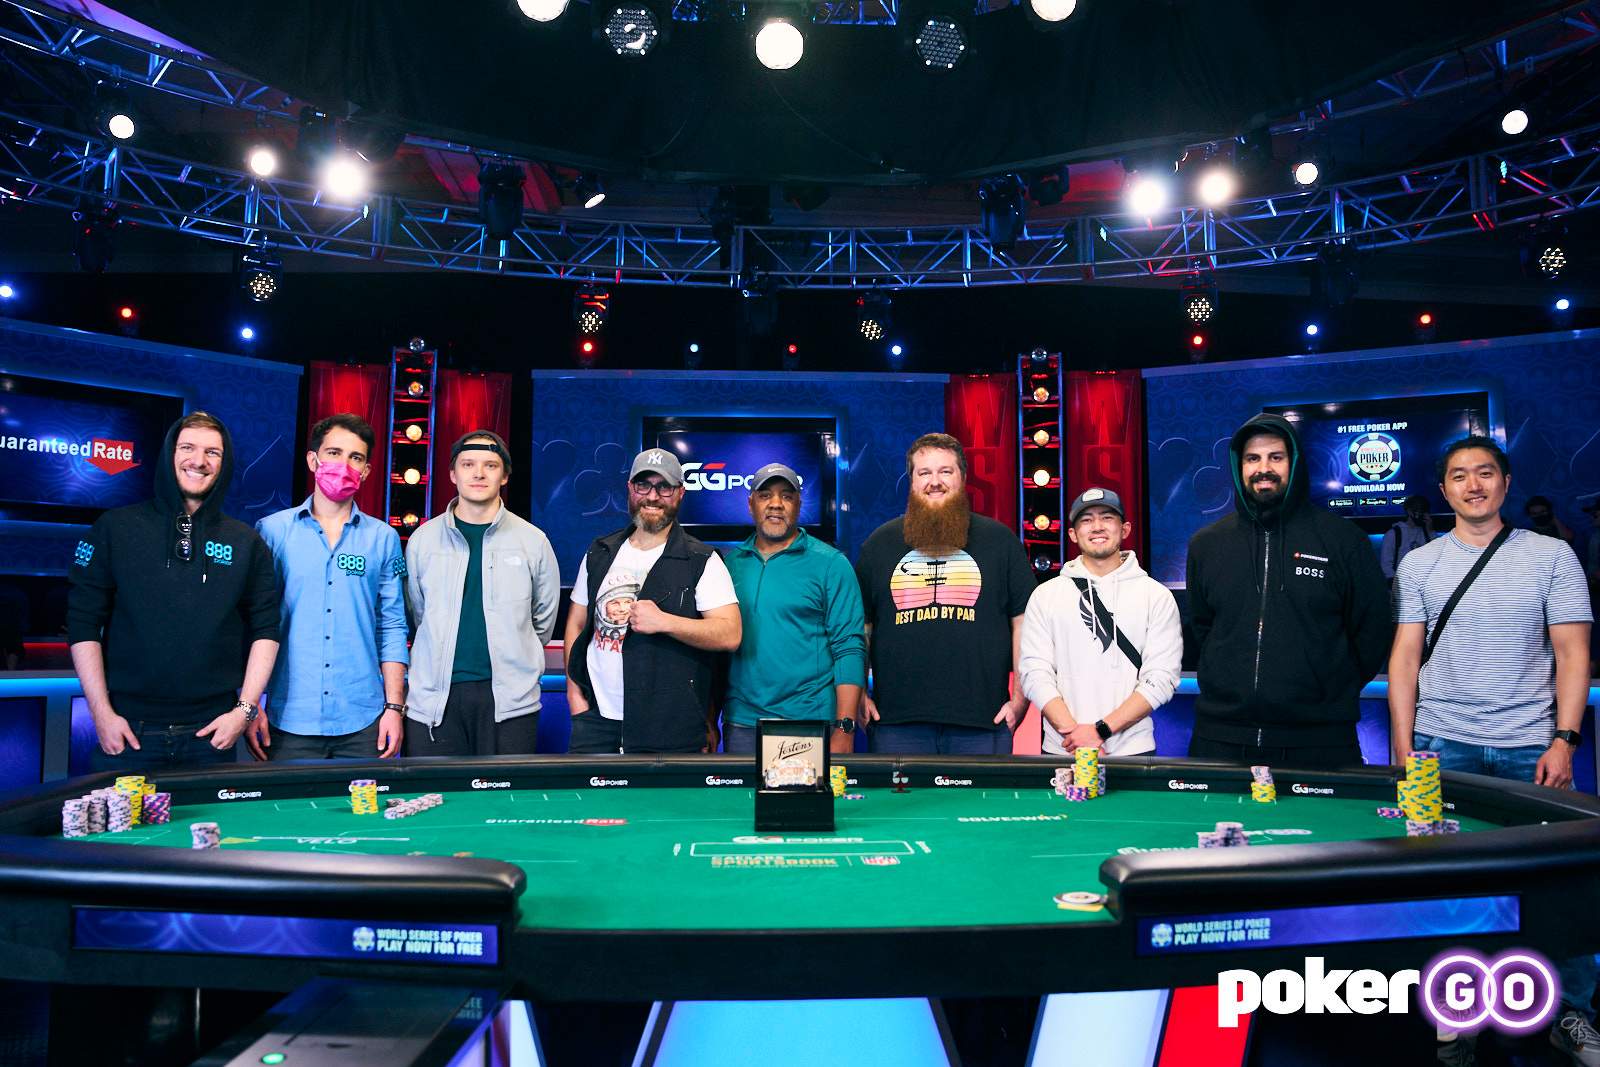 Find Out Who Reached the 2021 WSOP Main Event Final Table